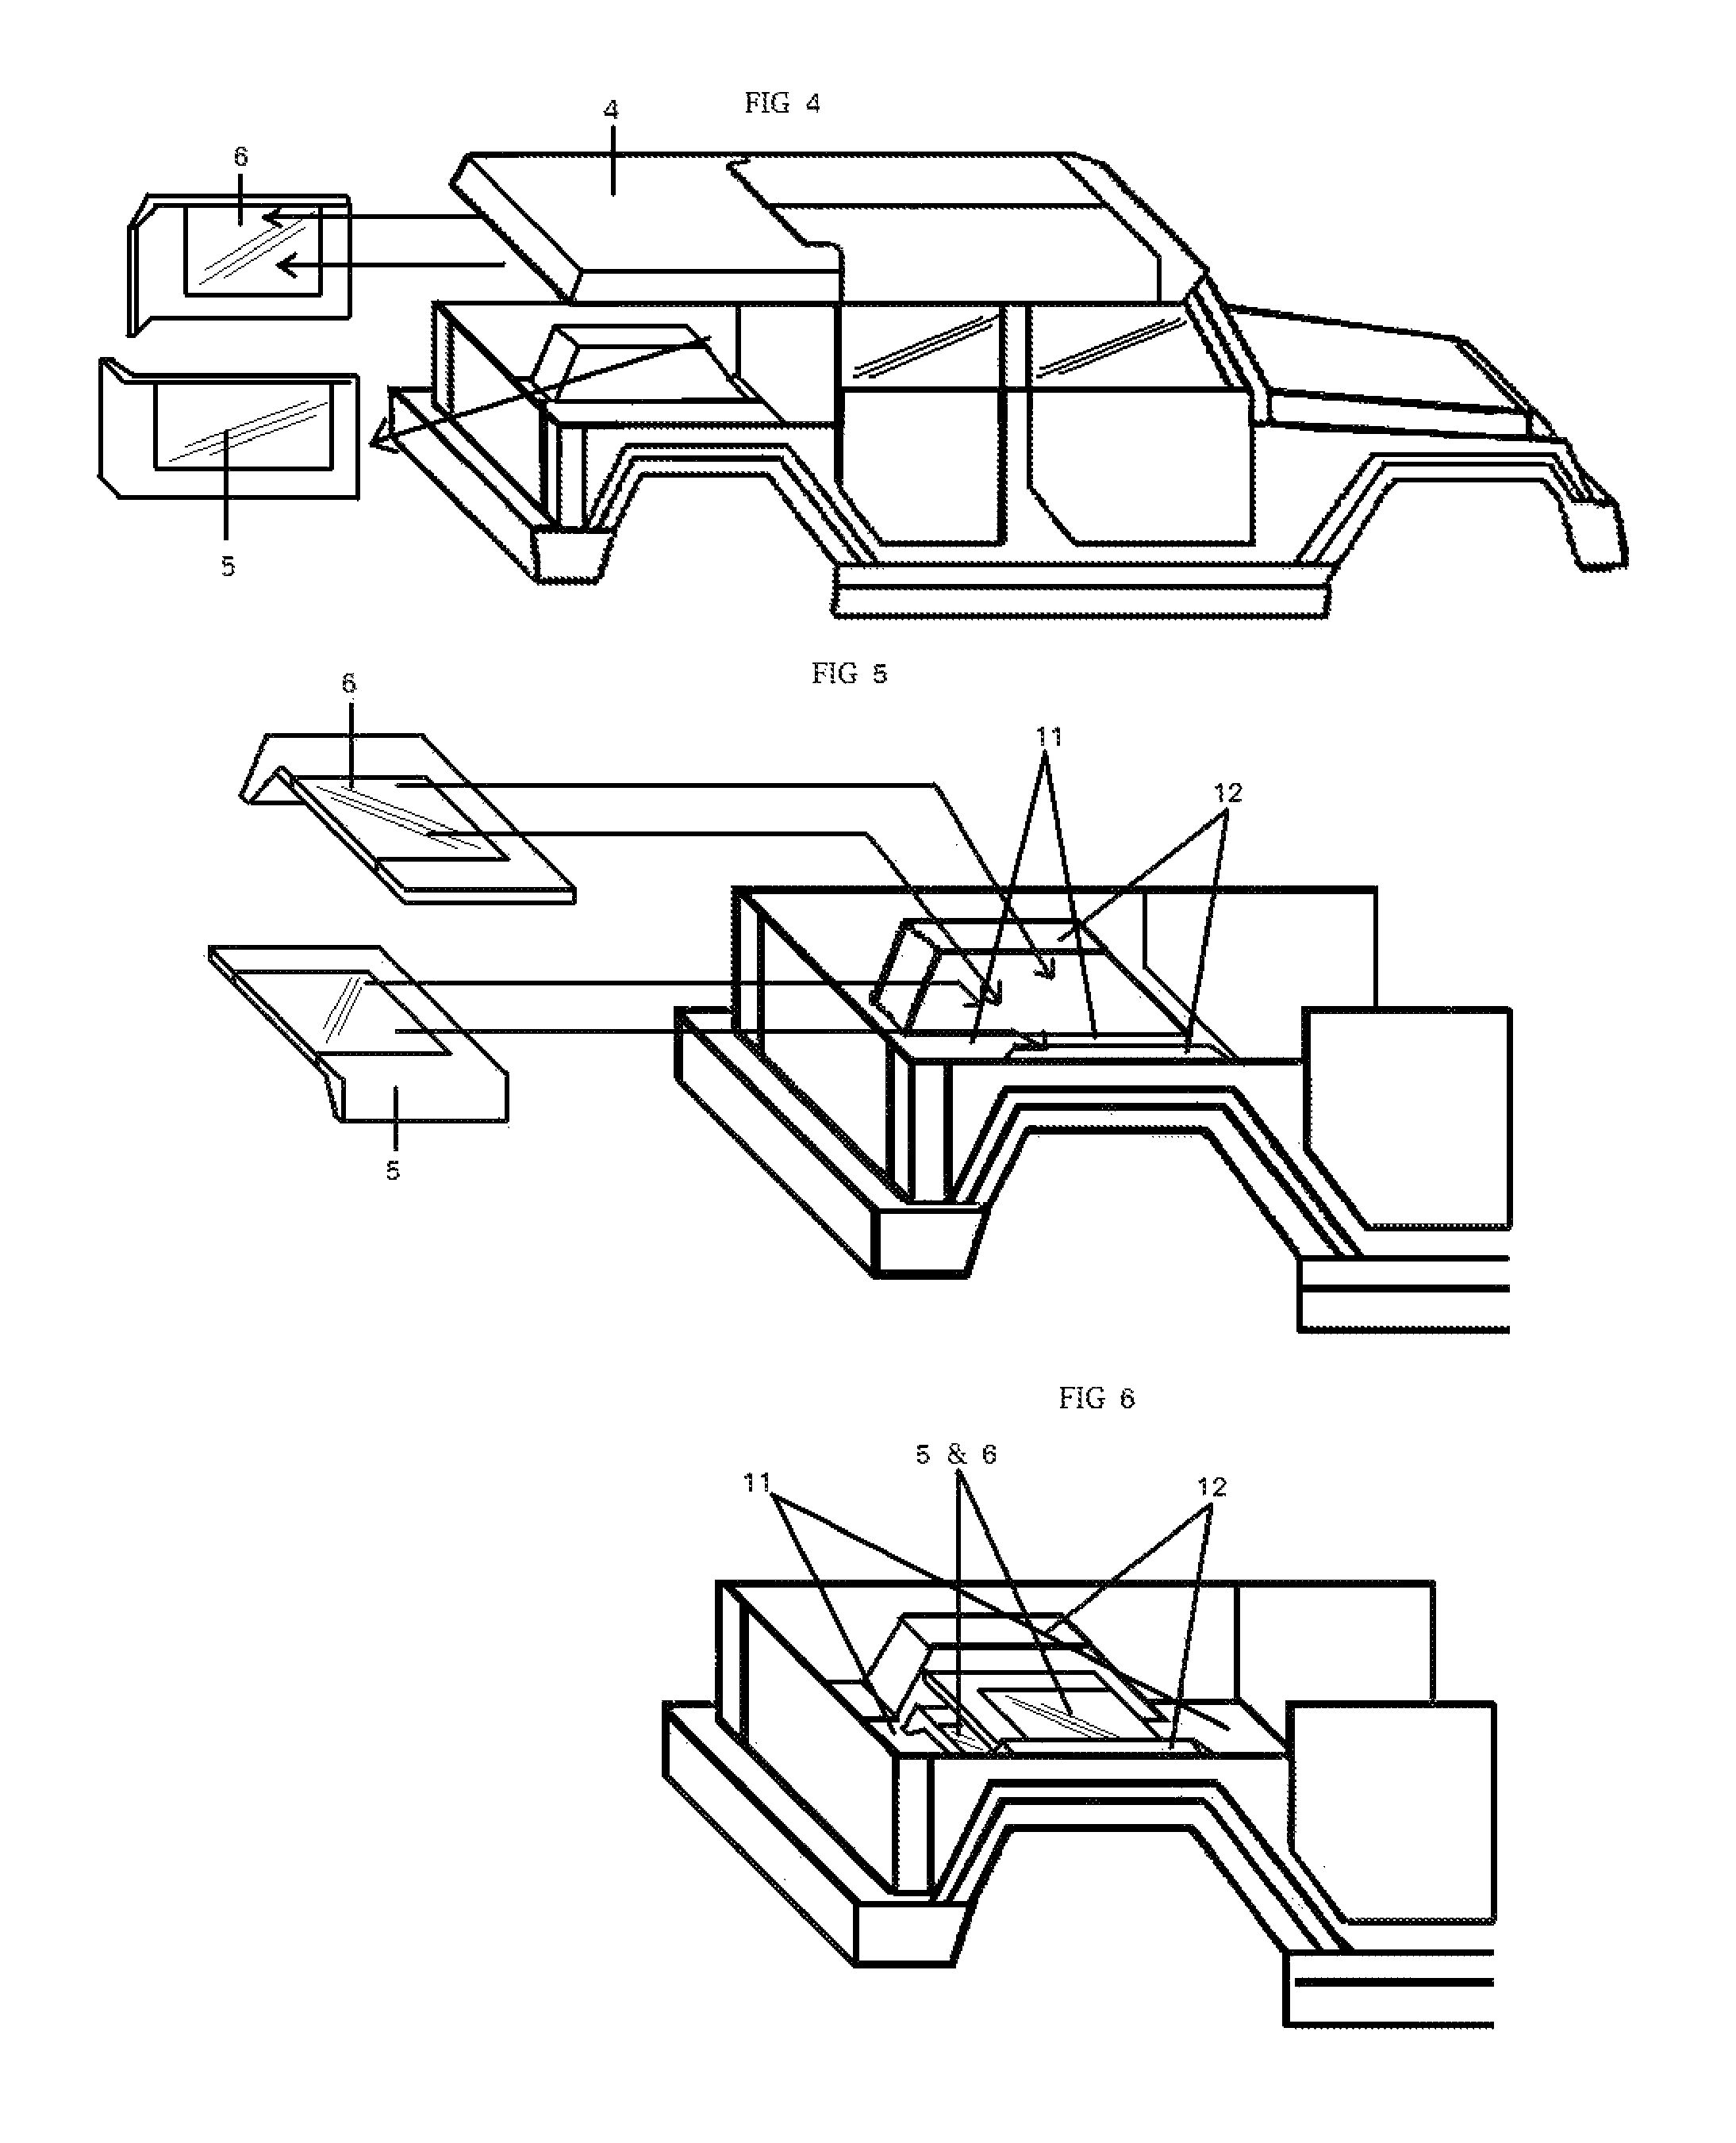 Vehicle with multiple elevation removable hard top and secure storage underneath